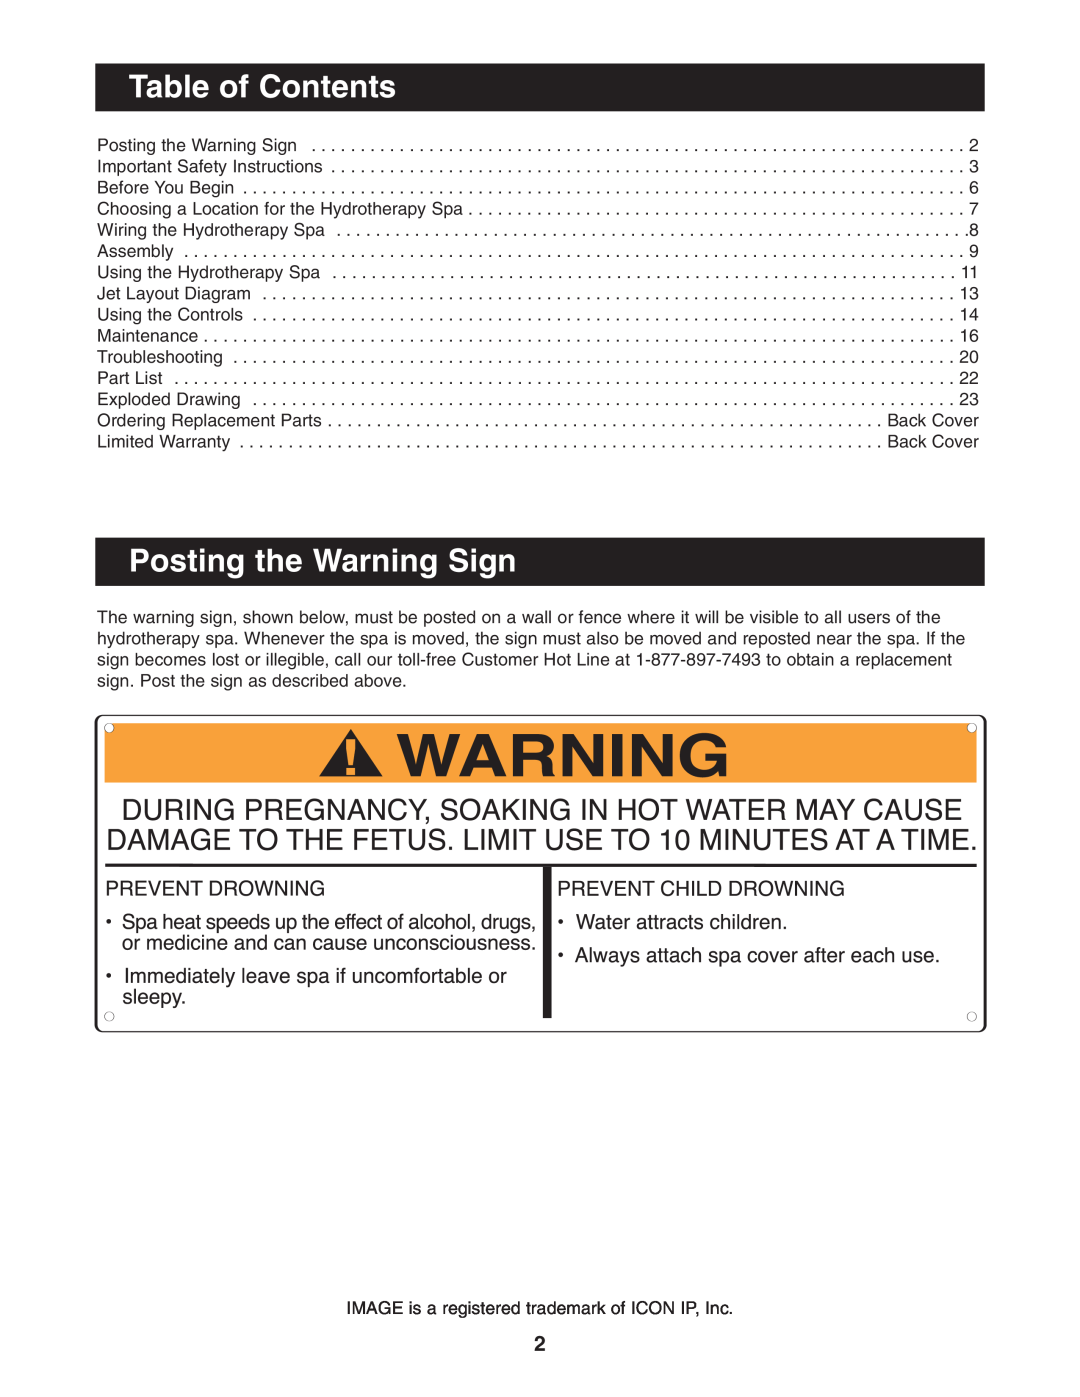 Image IMSB53950 user manual Table of Contents, Posting the Warning Sign, IMAGE is a registered trademark of ICON IP, Inc 